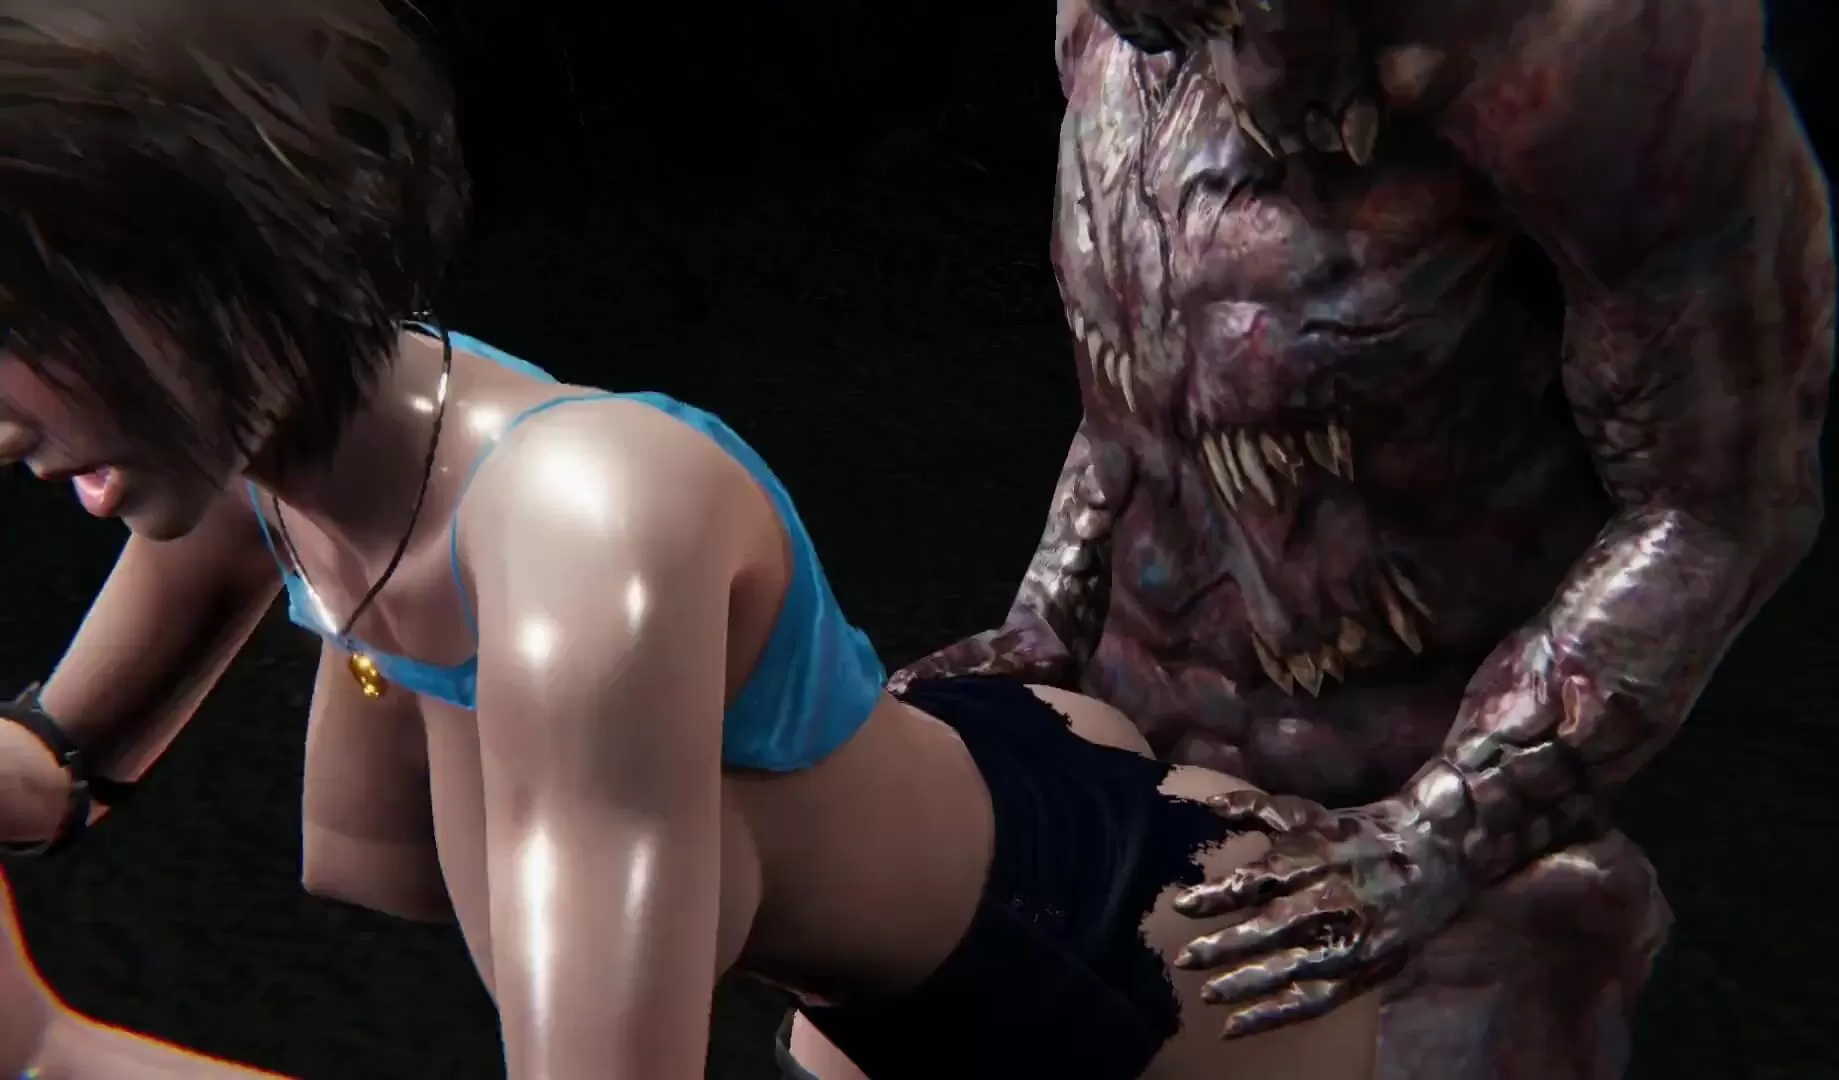 Zombie Hentai Porn Free - Jill Valentine Resident Evil Anal Zombie Fuck and Deepthroat, ATM,  Squirting 3D Hentai watch online